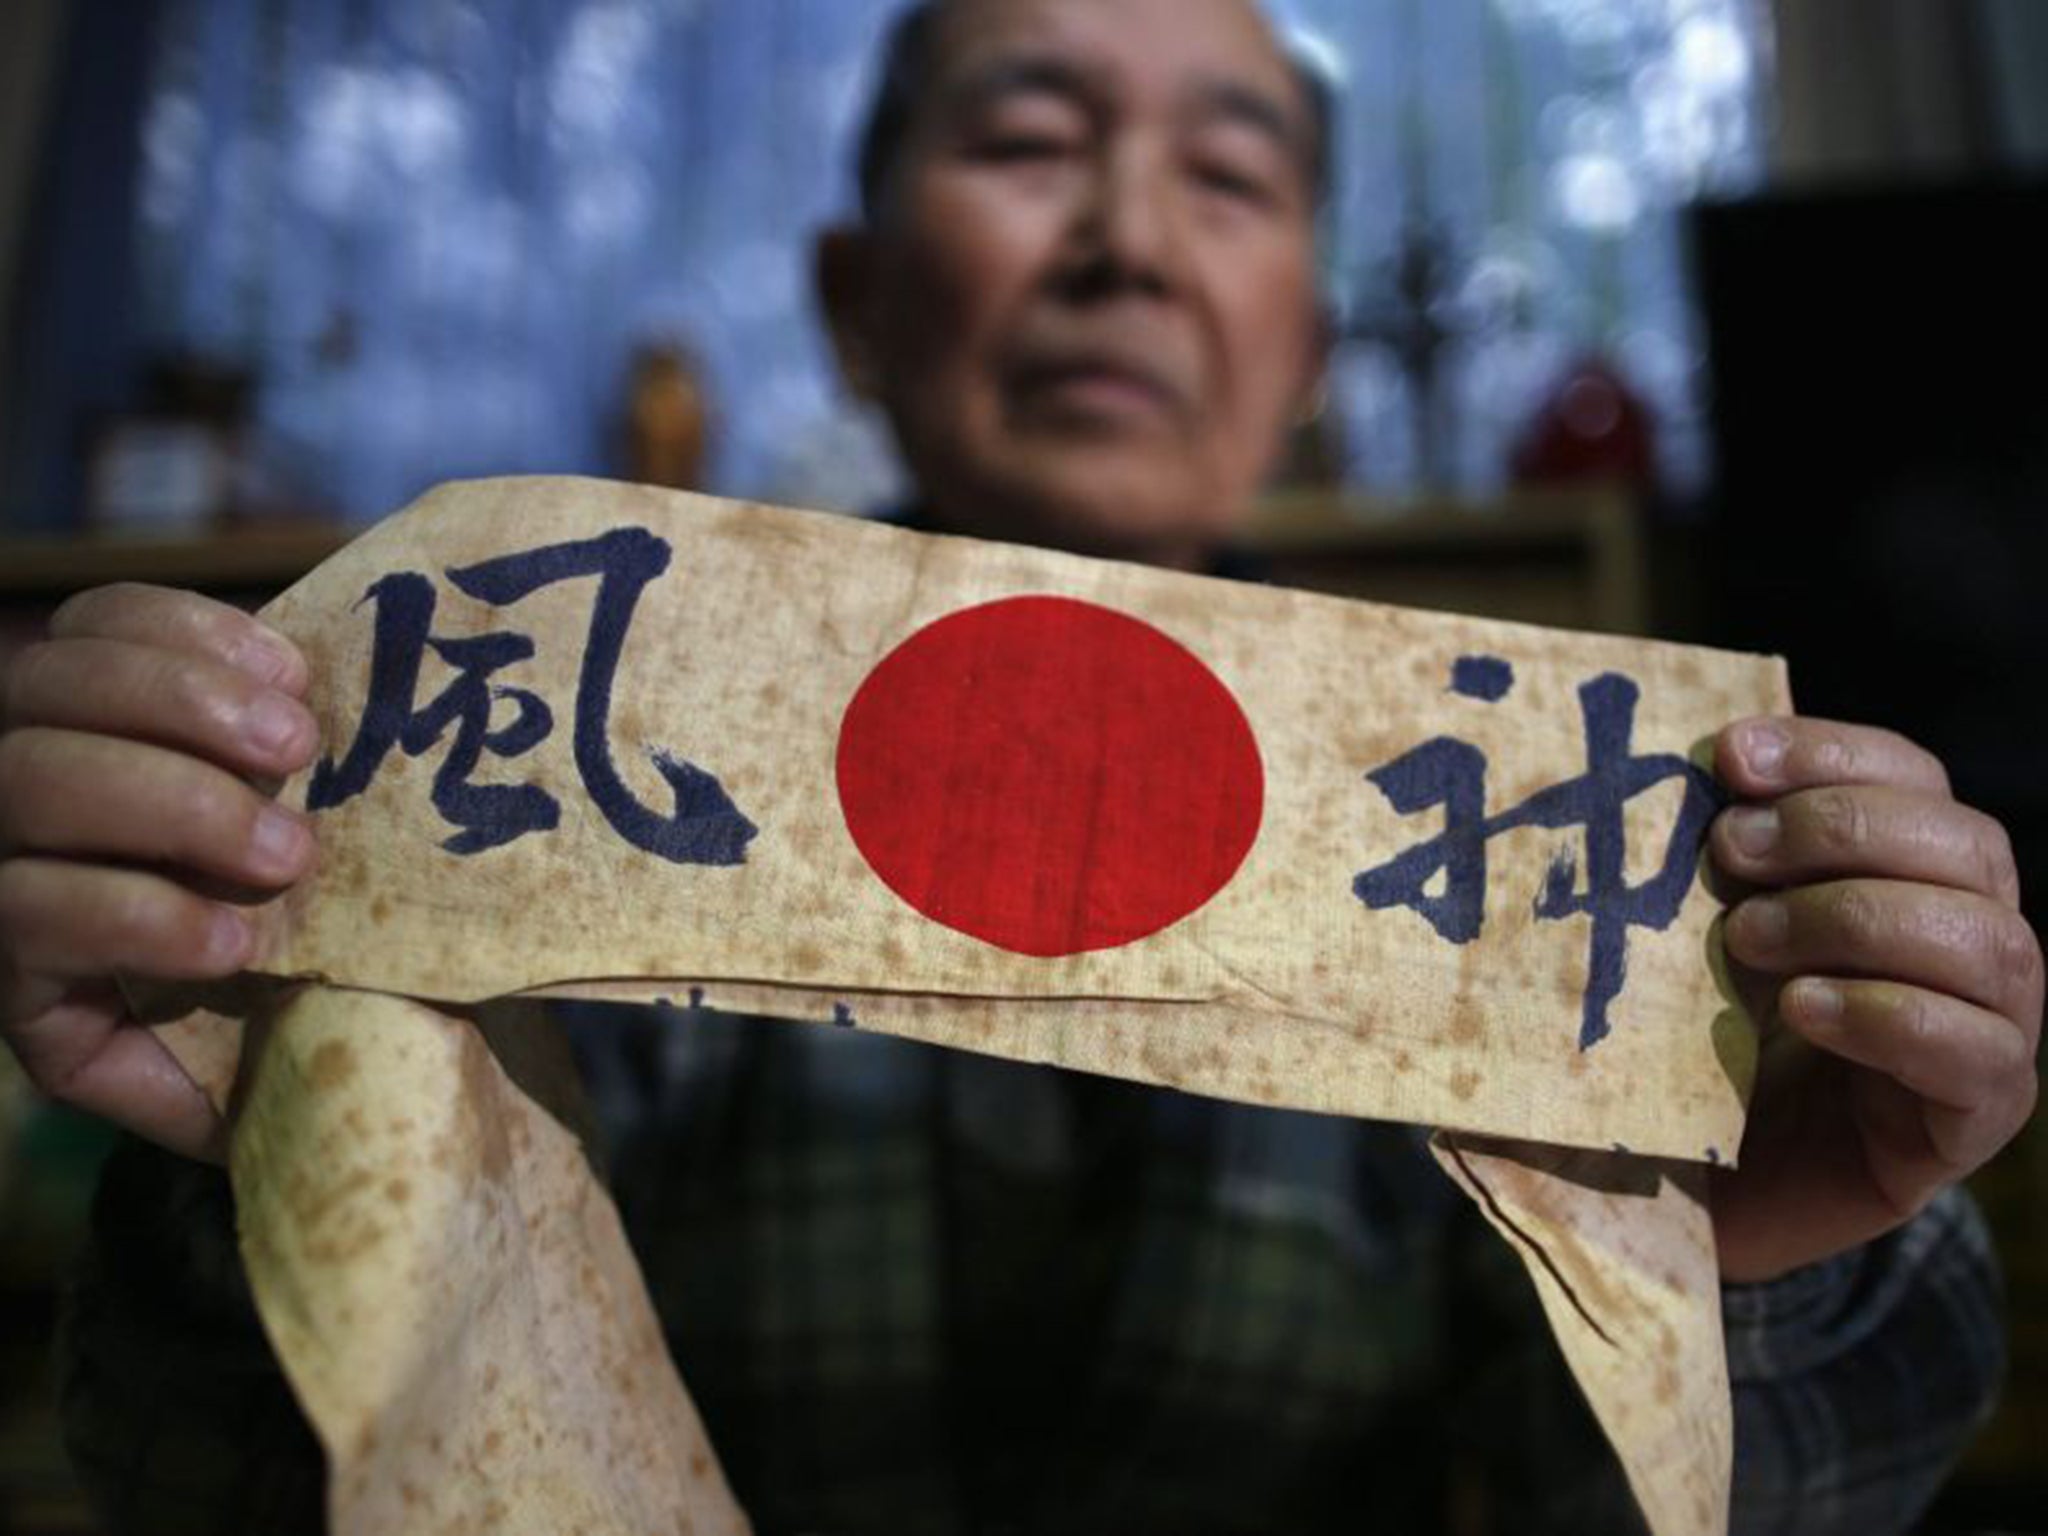 Katsumoto Saotome, 82, a survivor of the raids in 1945, holds a headband with the word ‘Kamikaze’ written on it